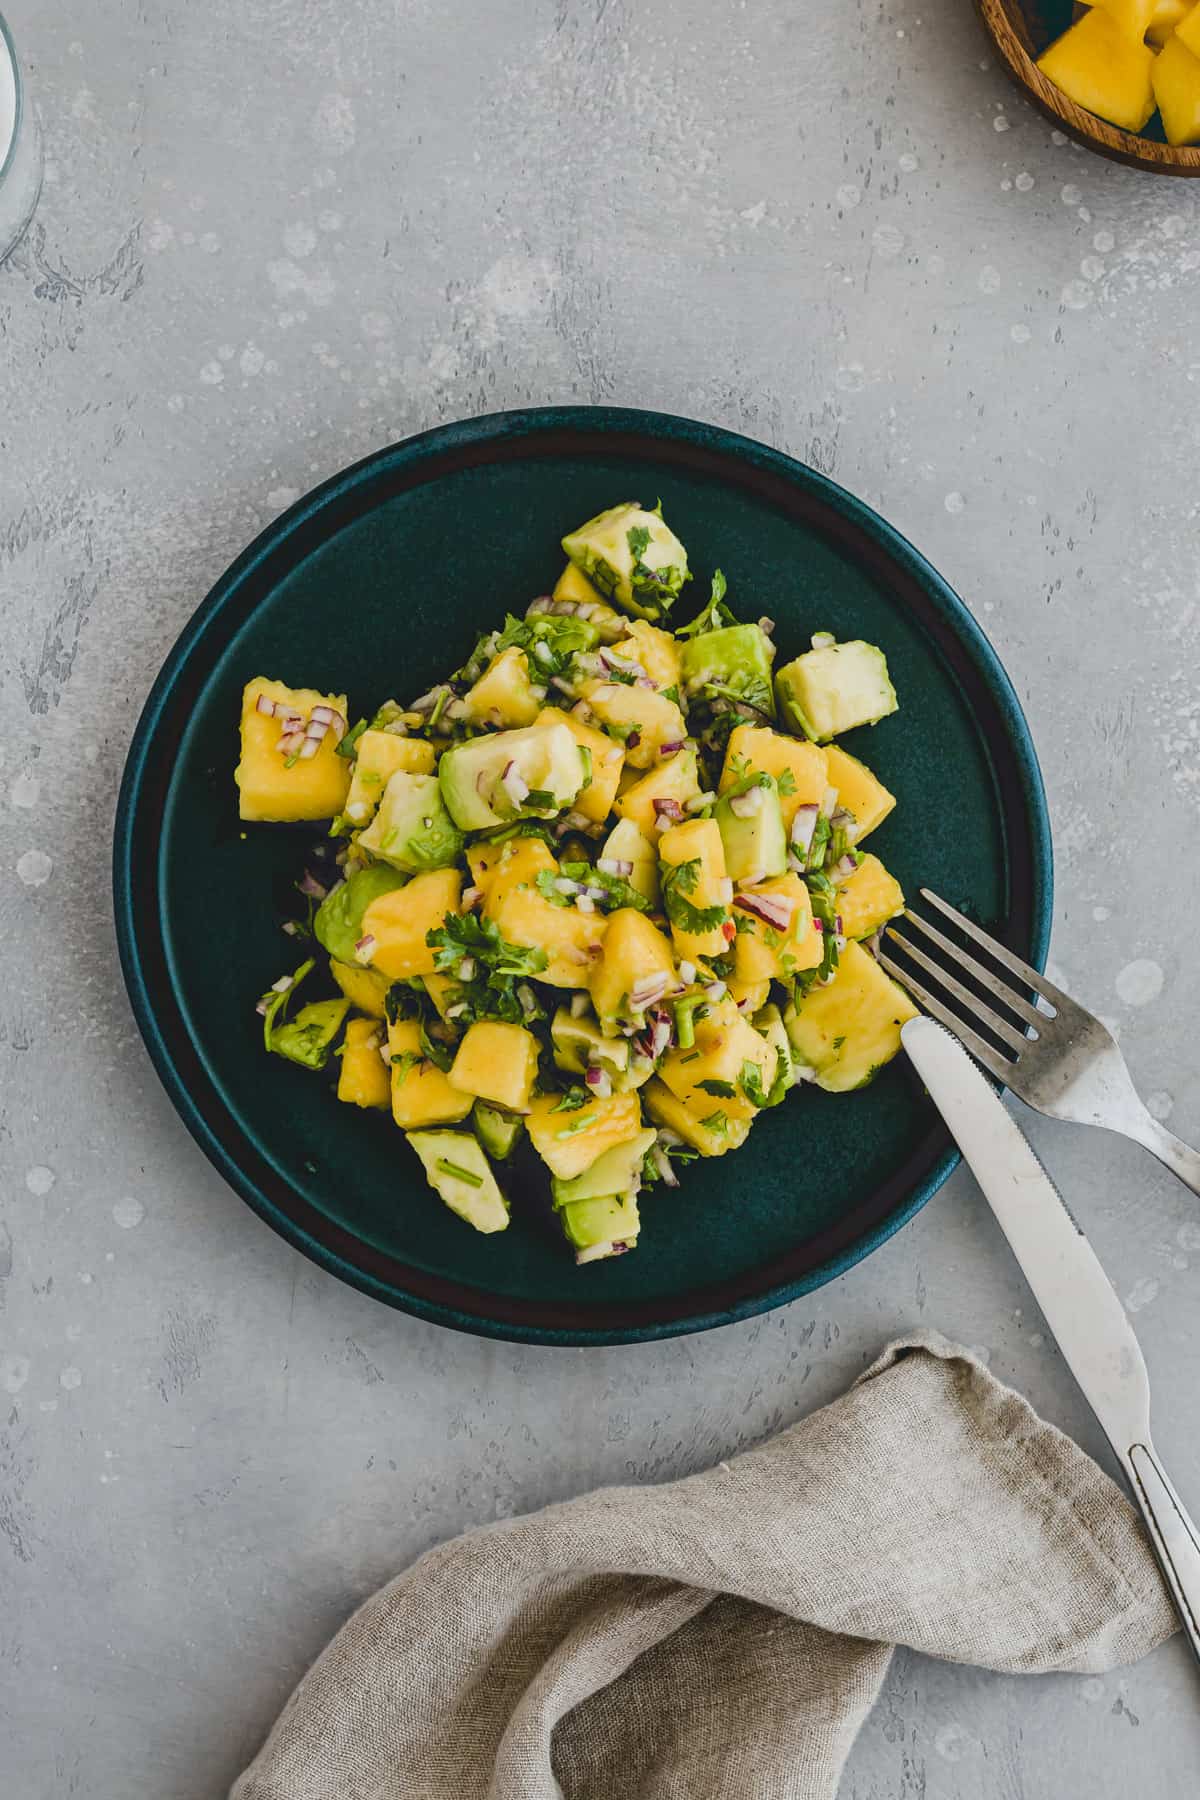 Top view of a teal plate with mango avocado salad on it with a knife and fork on the edge of the plate. 